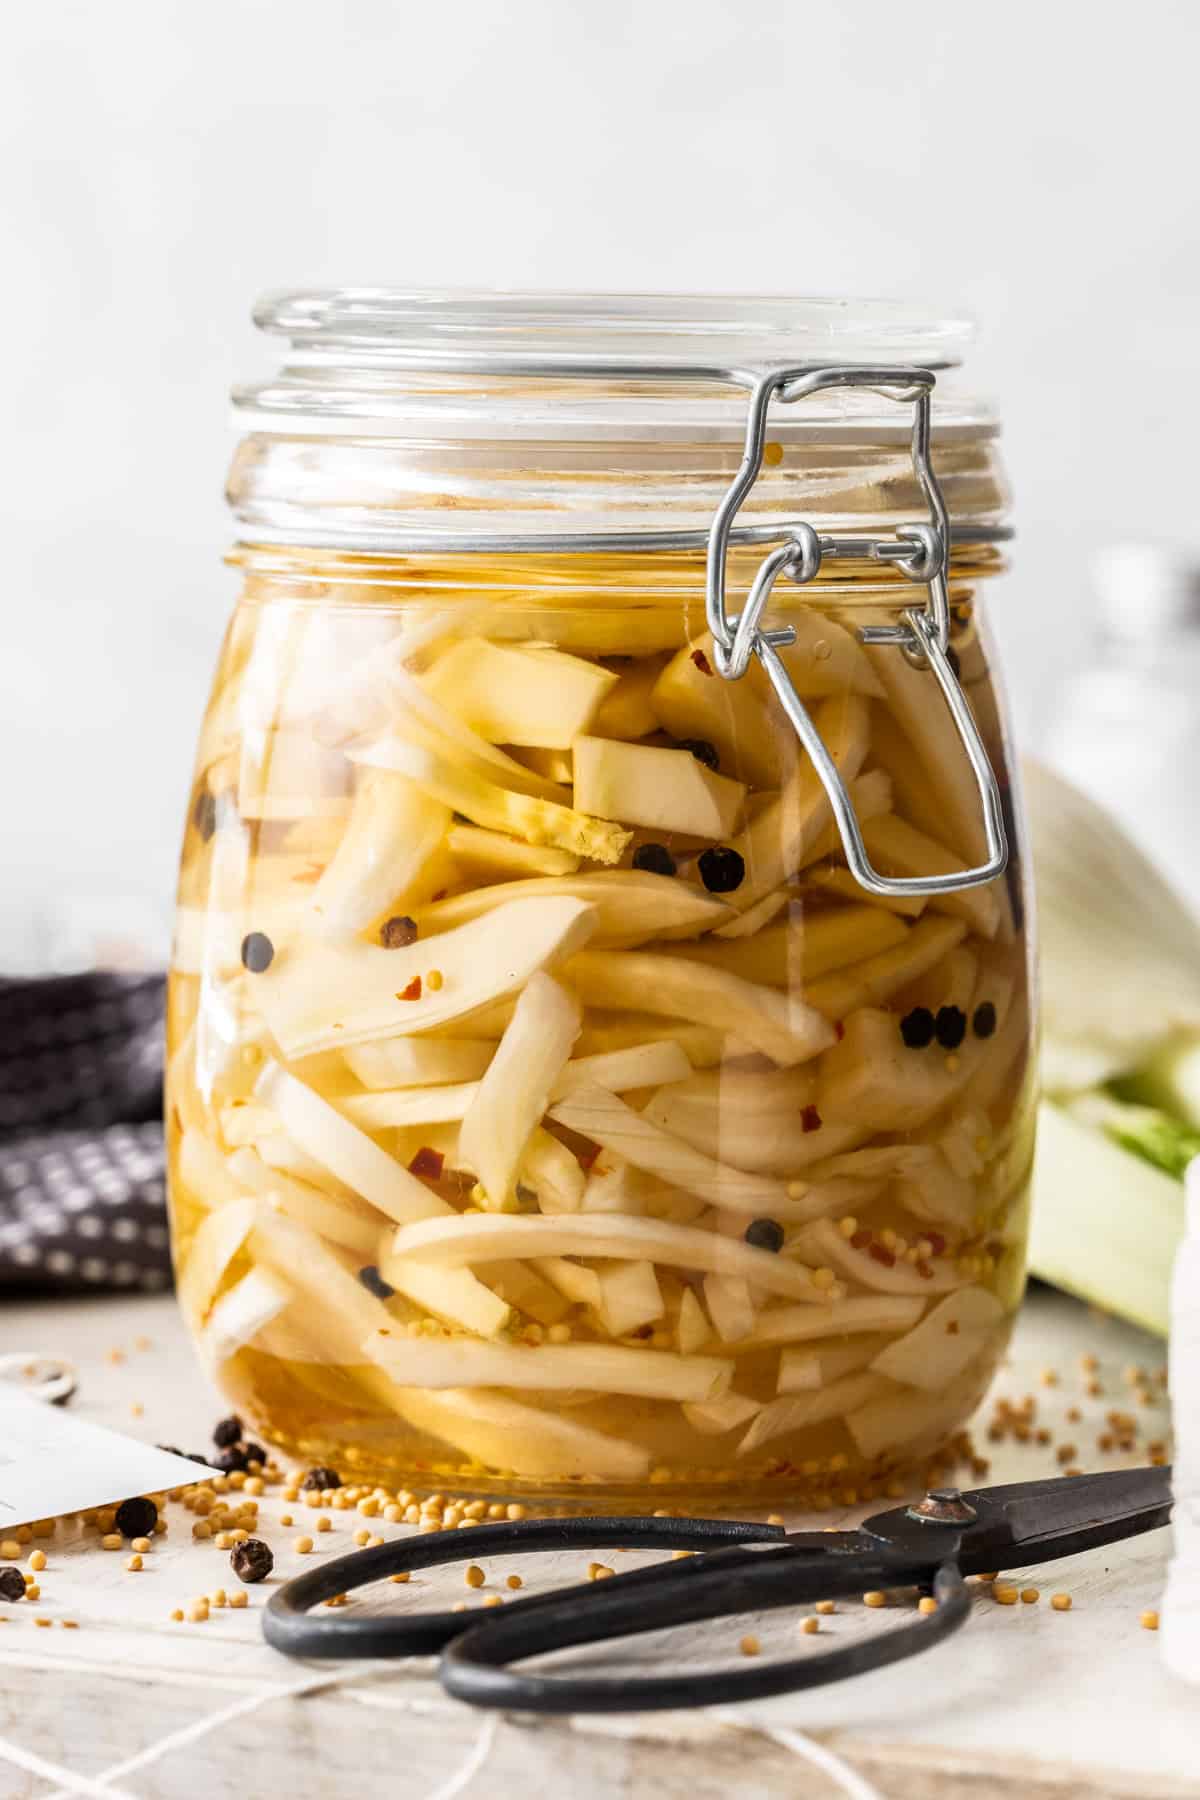 Jar of Pickled Fennel, sitting on a wooden board, with some herbs and spices around the edge.